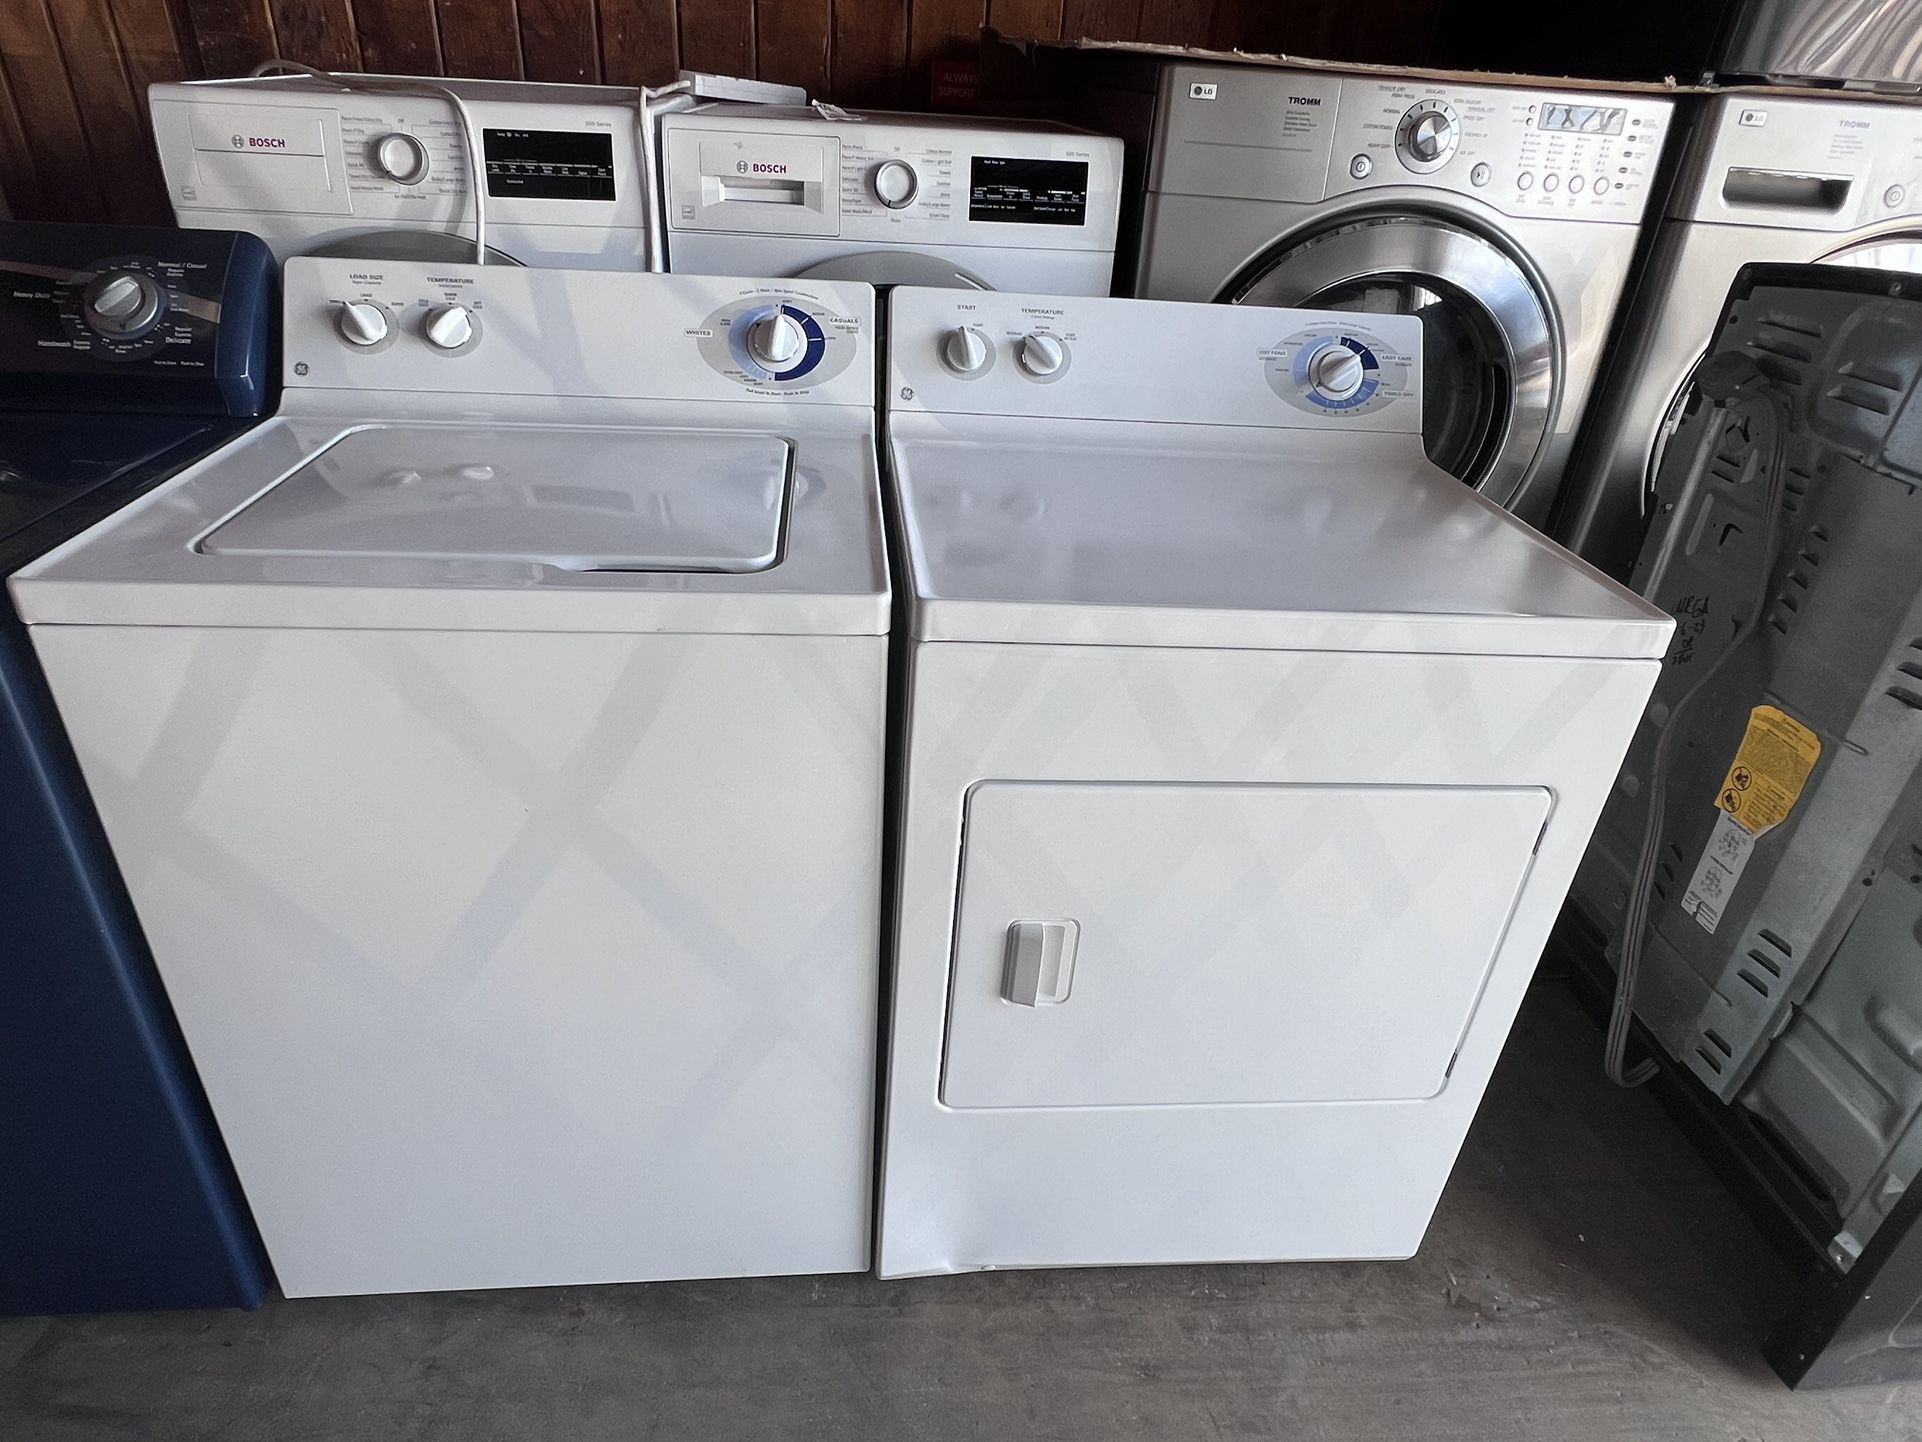 He Washer And Dryer Set In White Used Working Good